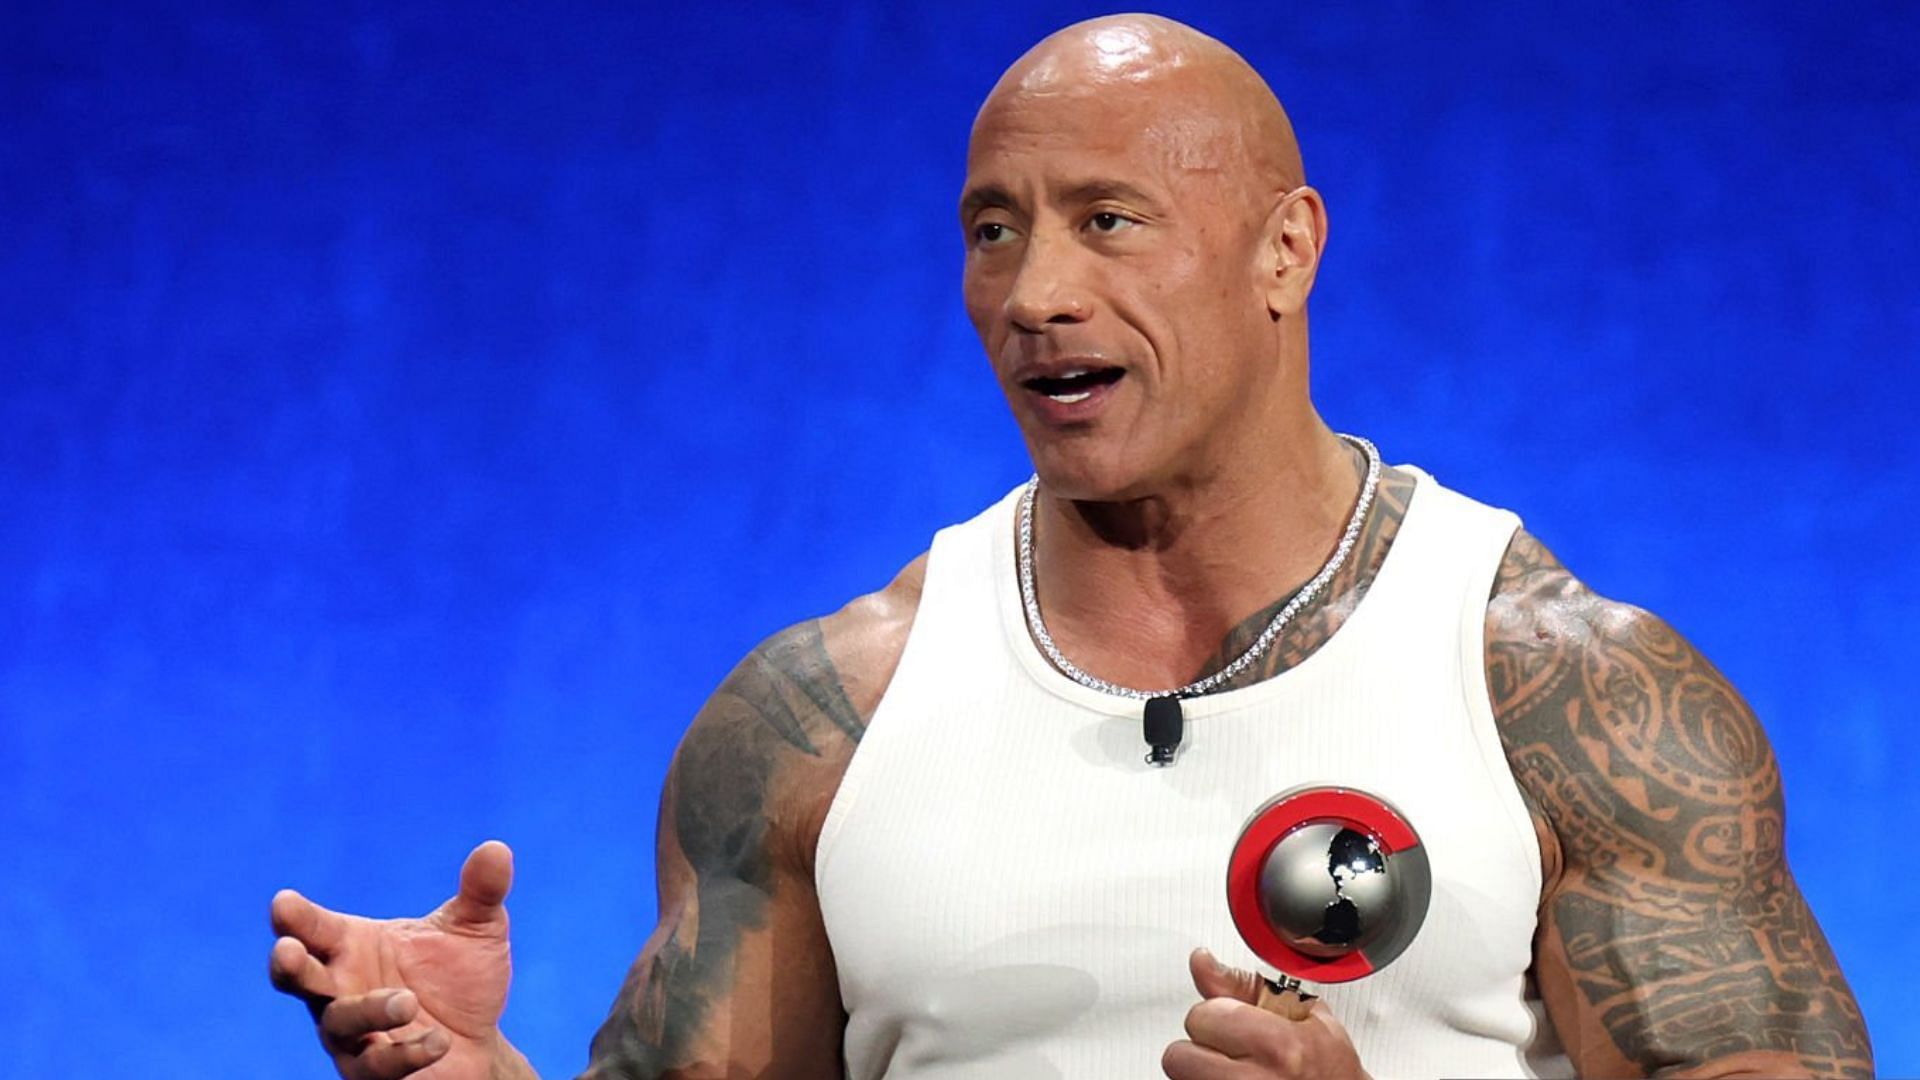  Dwayne Johnson (Photo by Gabe Ginsberg/Getty Images)